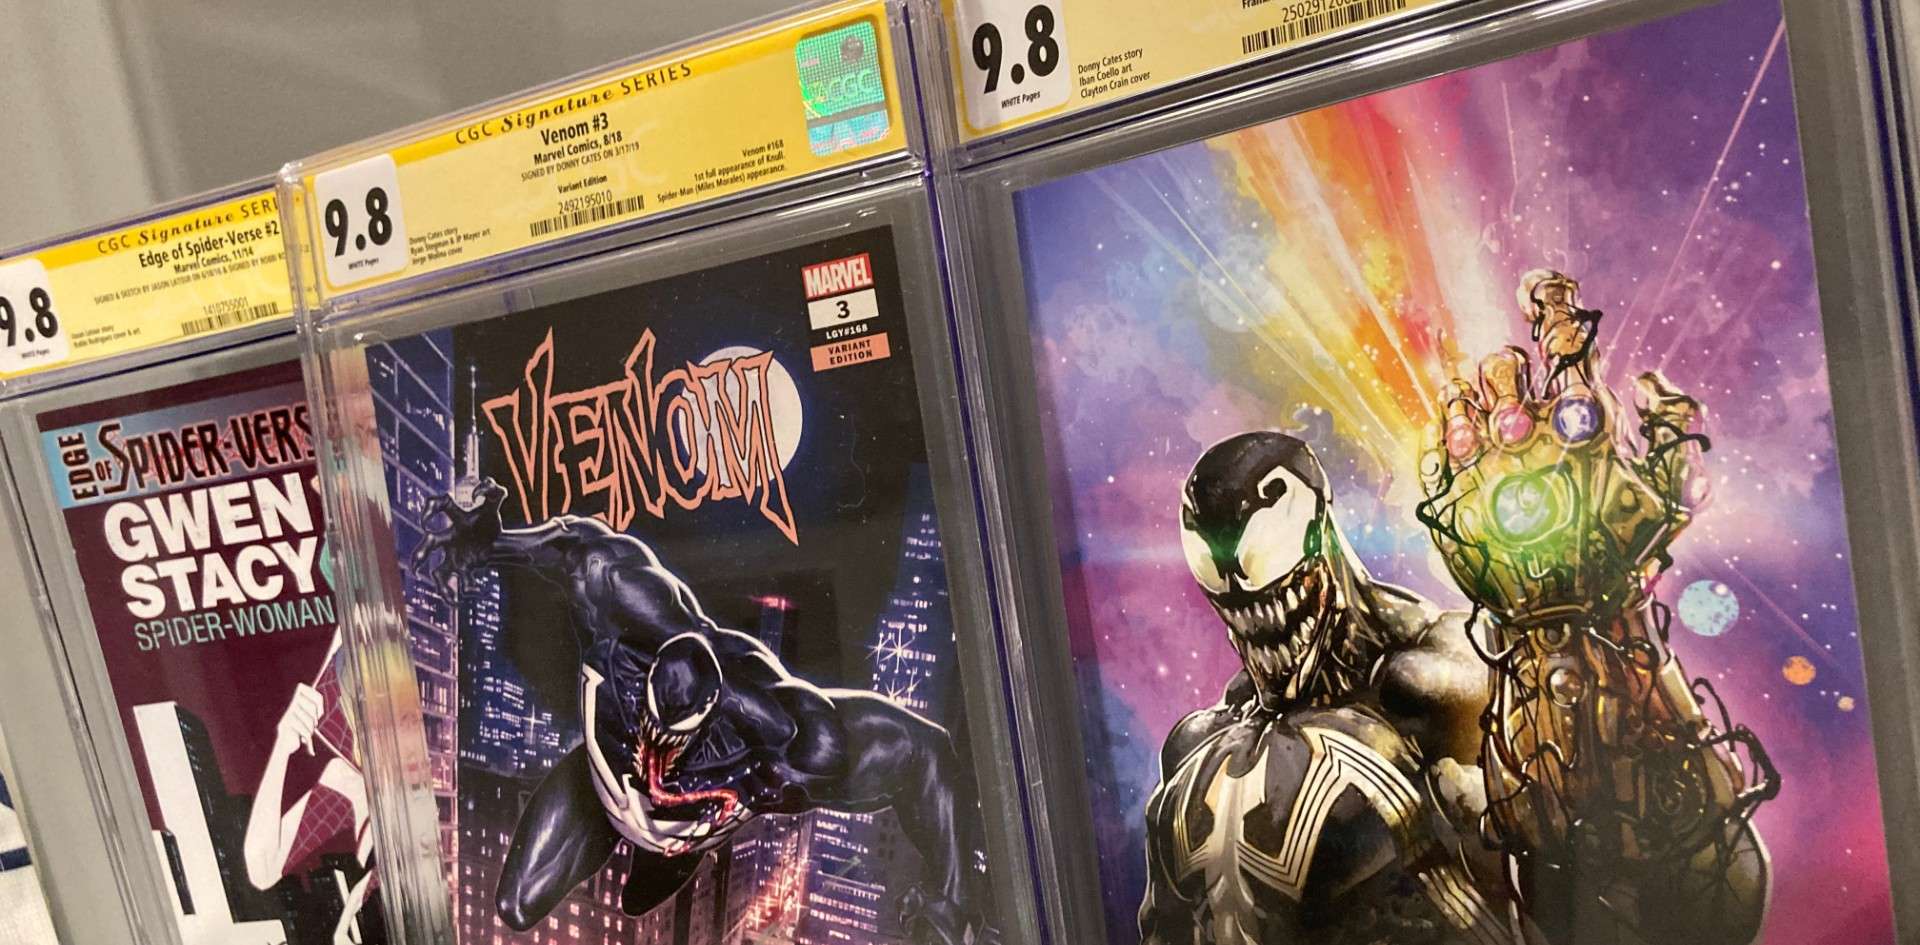 Venom, Miles Morales, Knull and Spider-Gwen are extremely hot right now in the comic book market. 